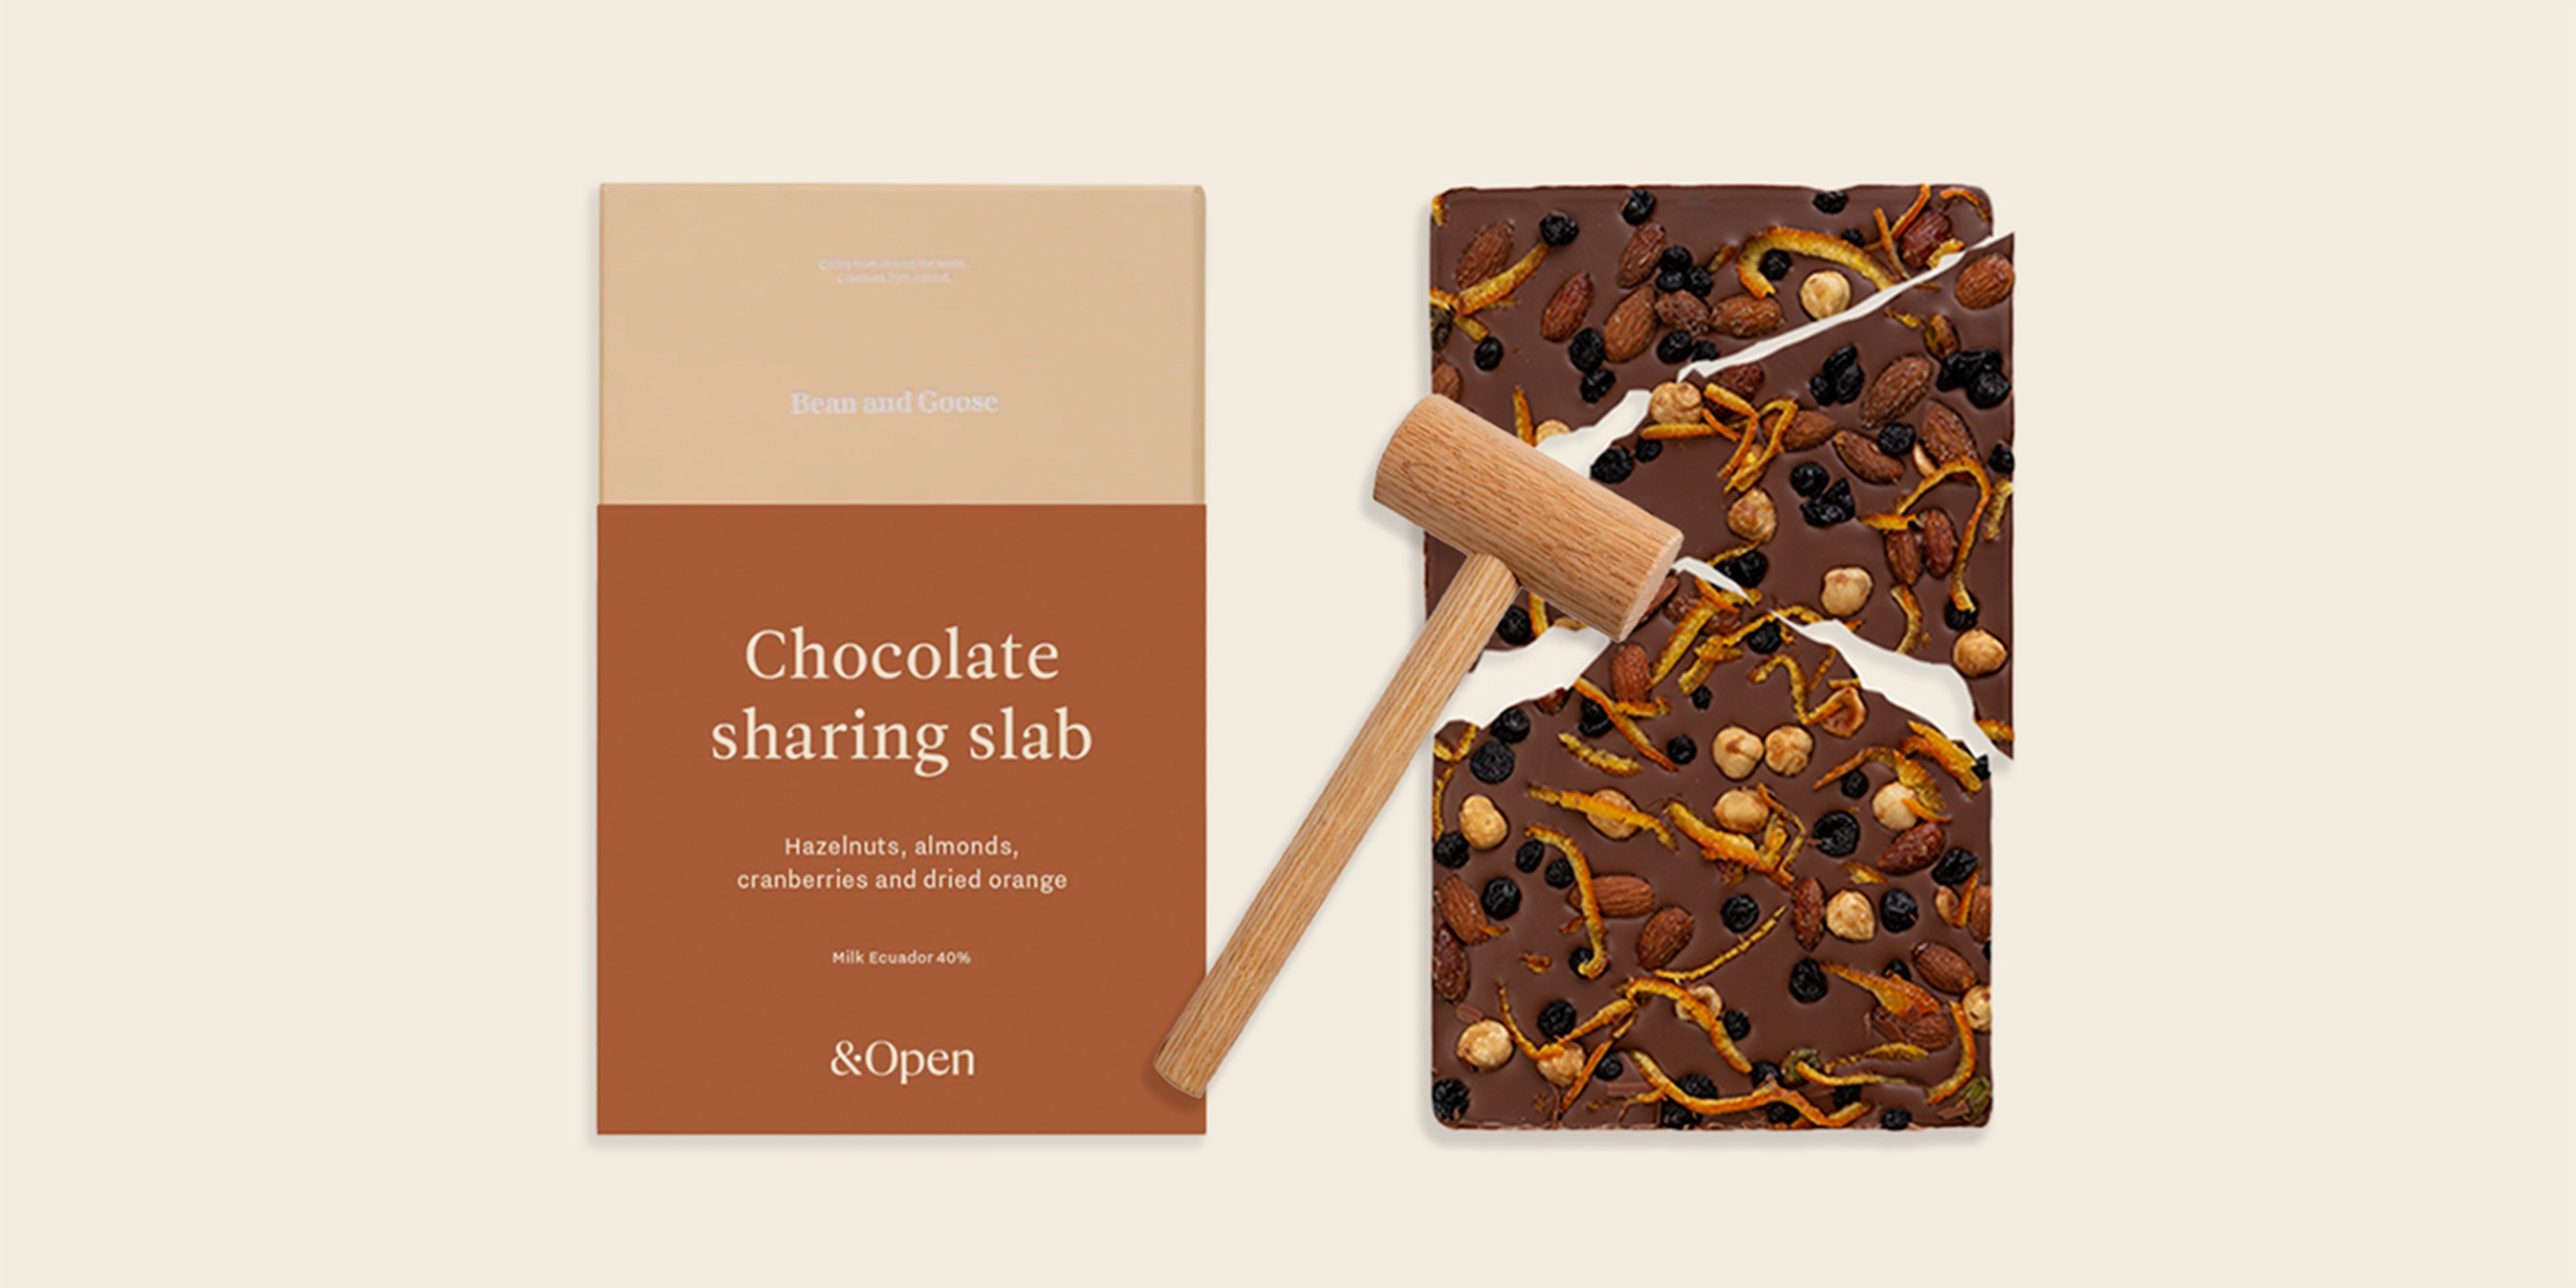 Chocolate sharing slab, with packaging, hammer and chocolate 